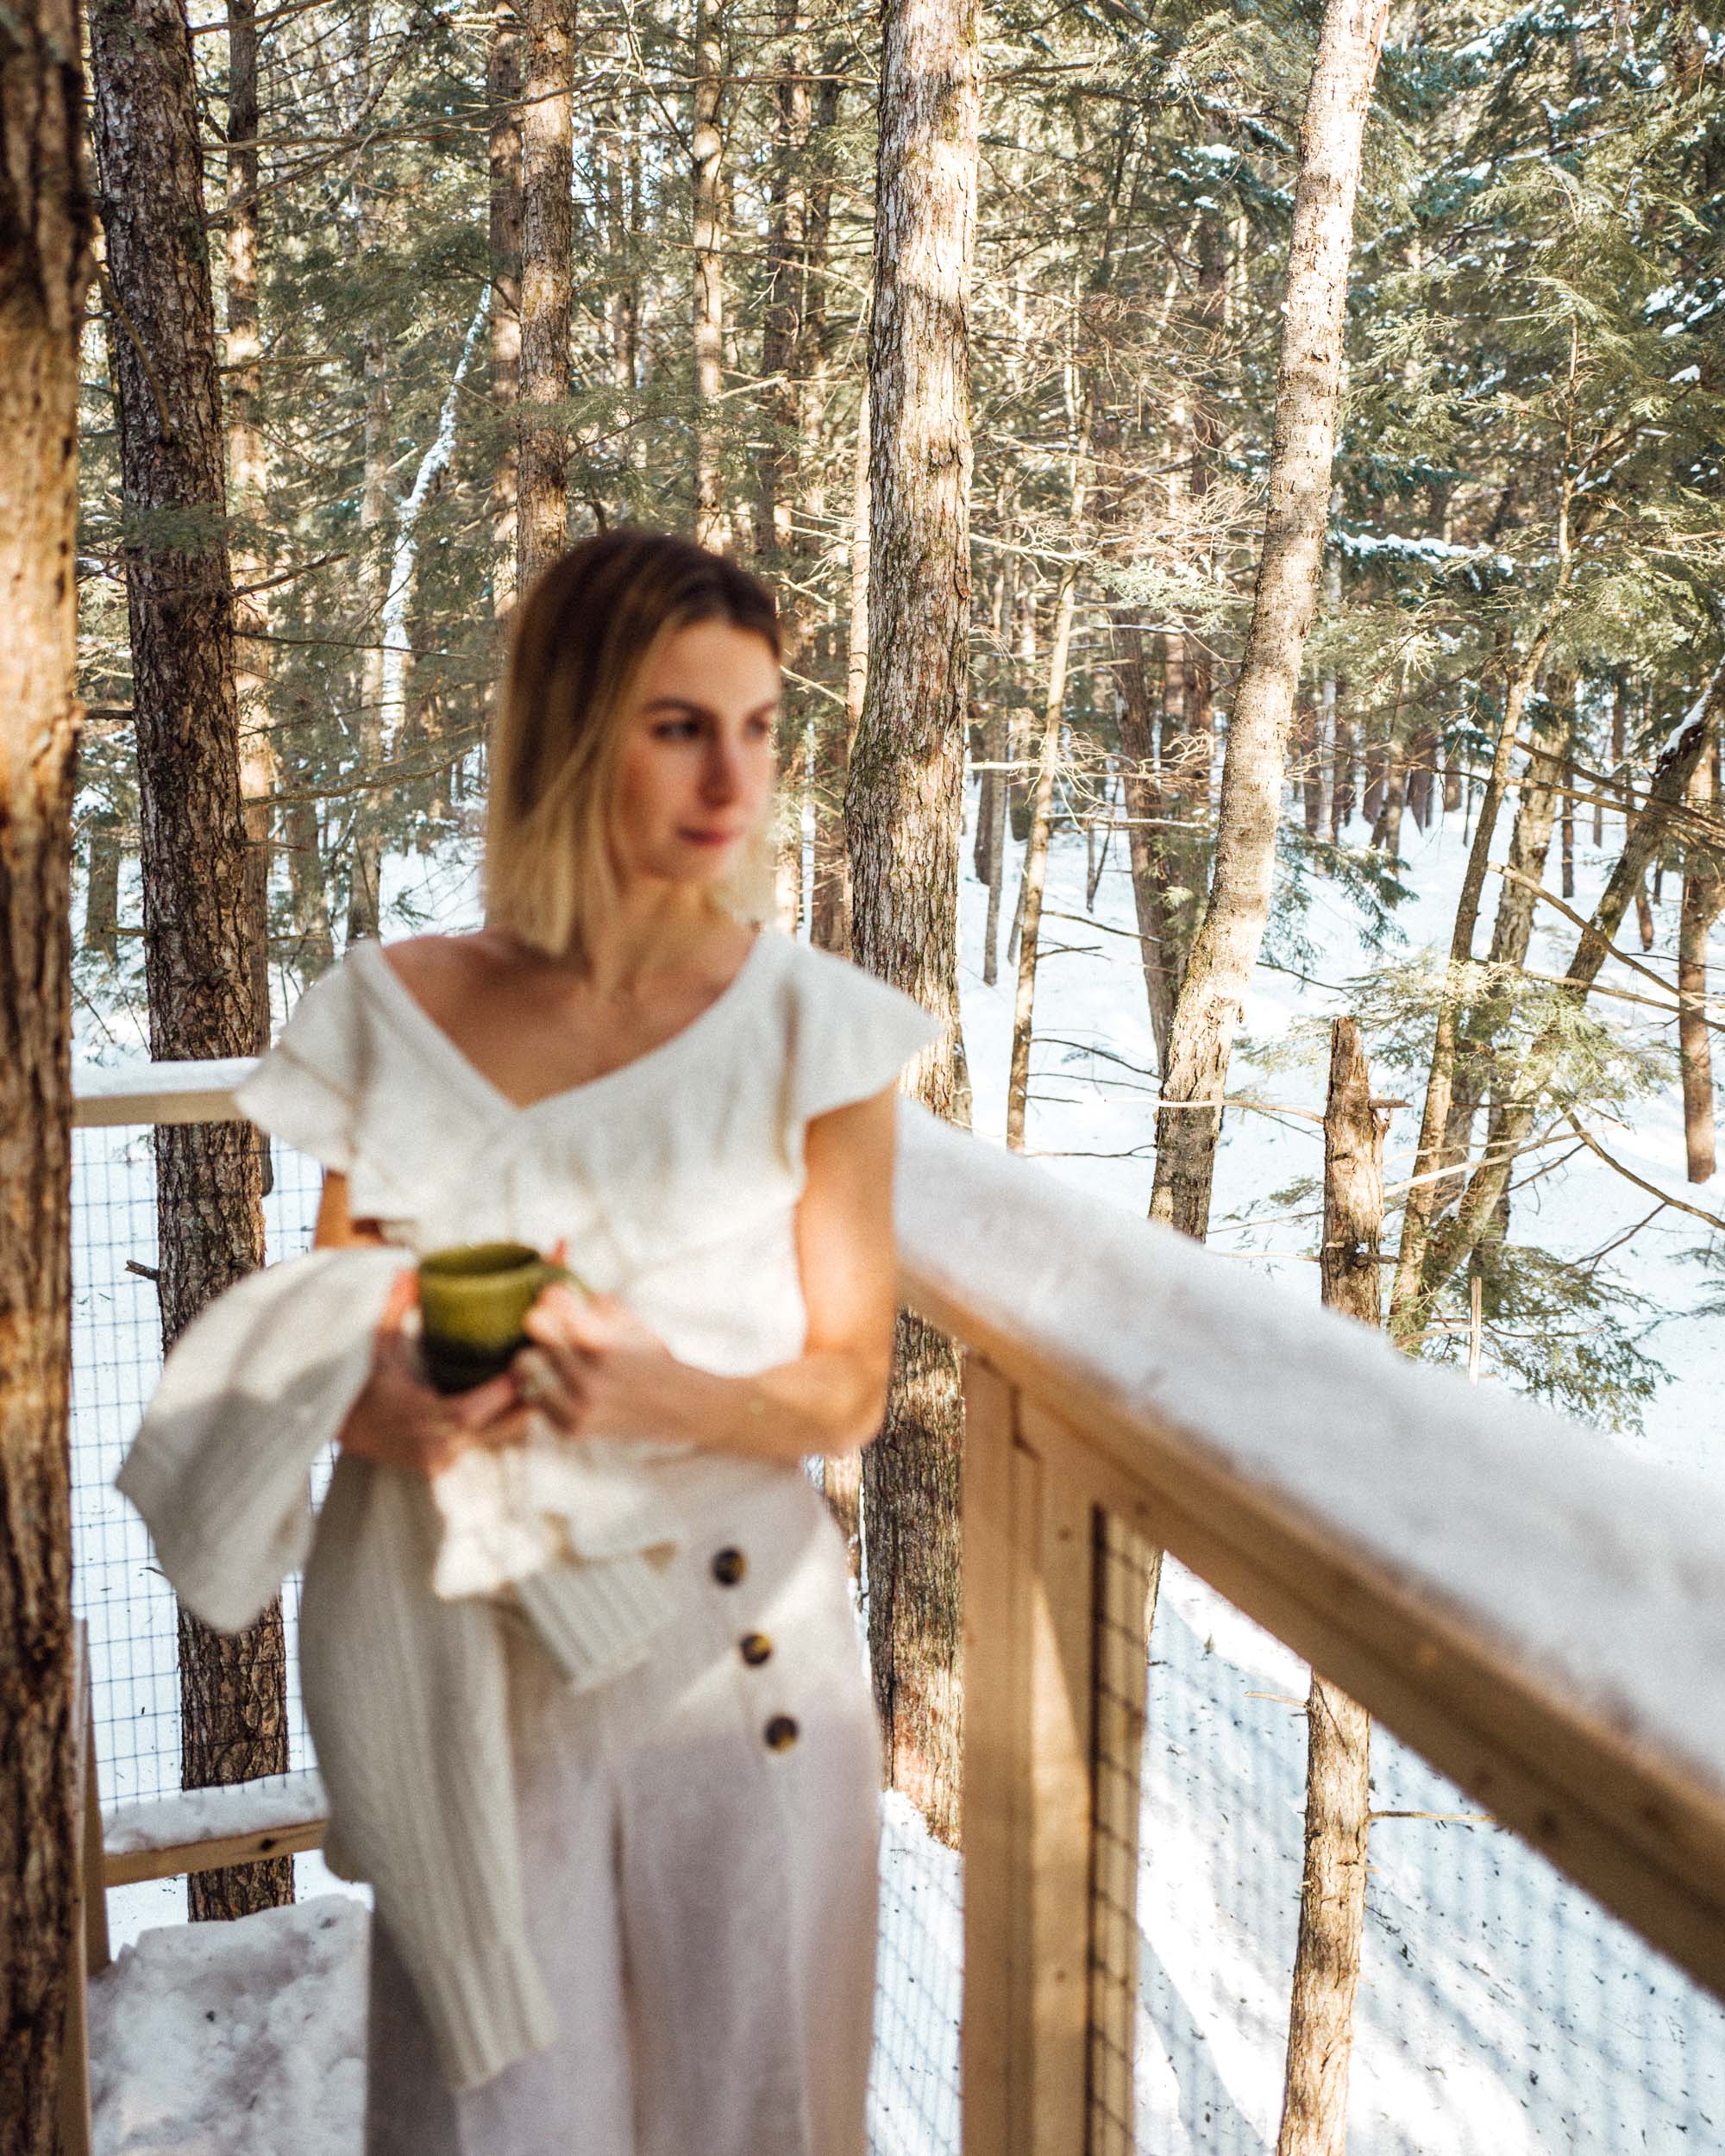 Anthropologie style outside our Treehouse Airbnb getaway in Vermont via Find Us Lost